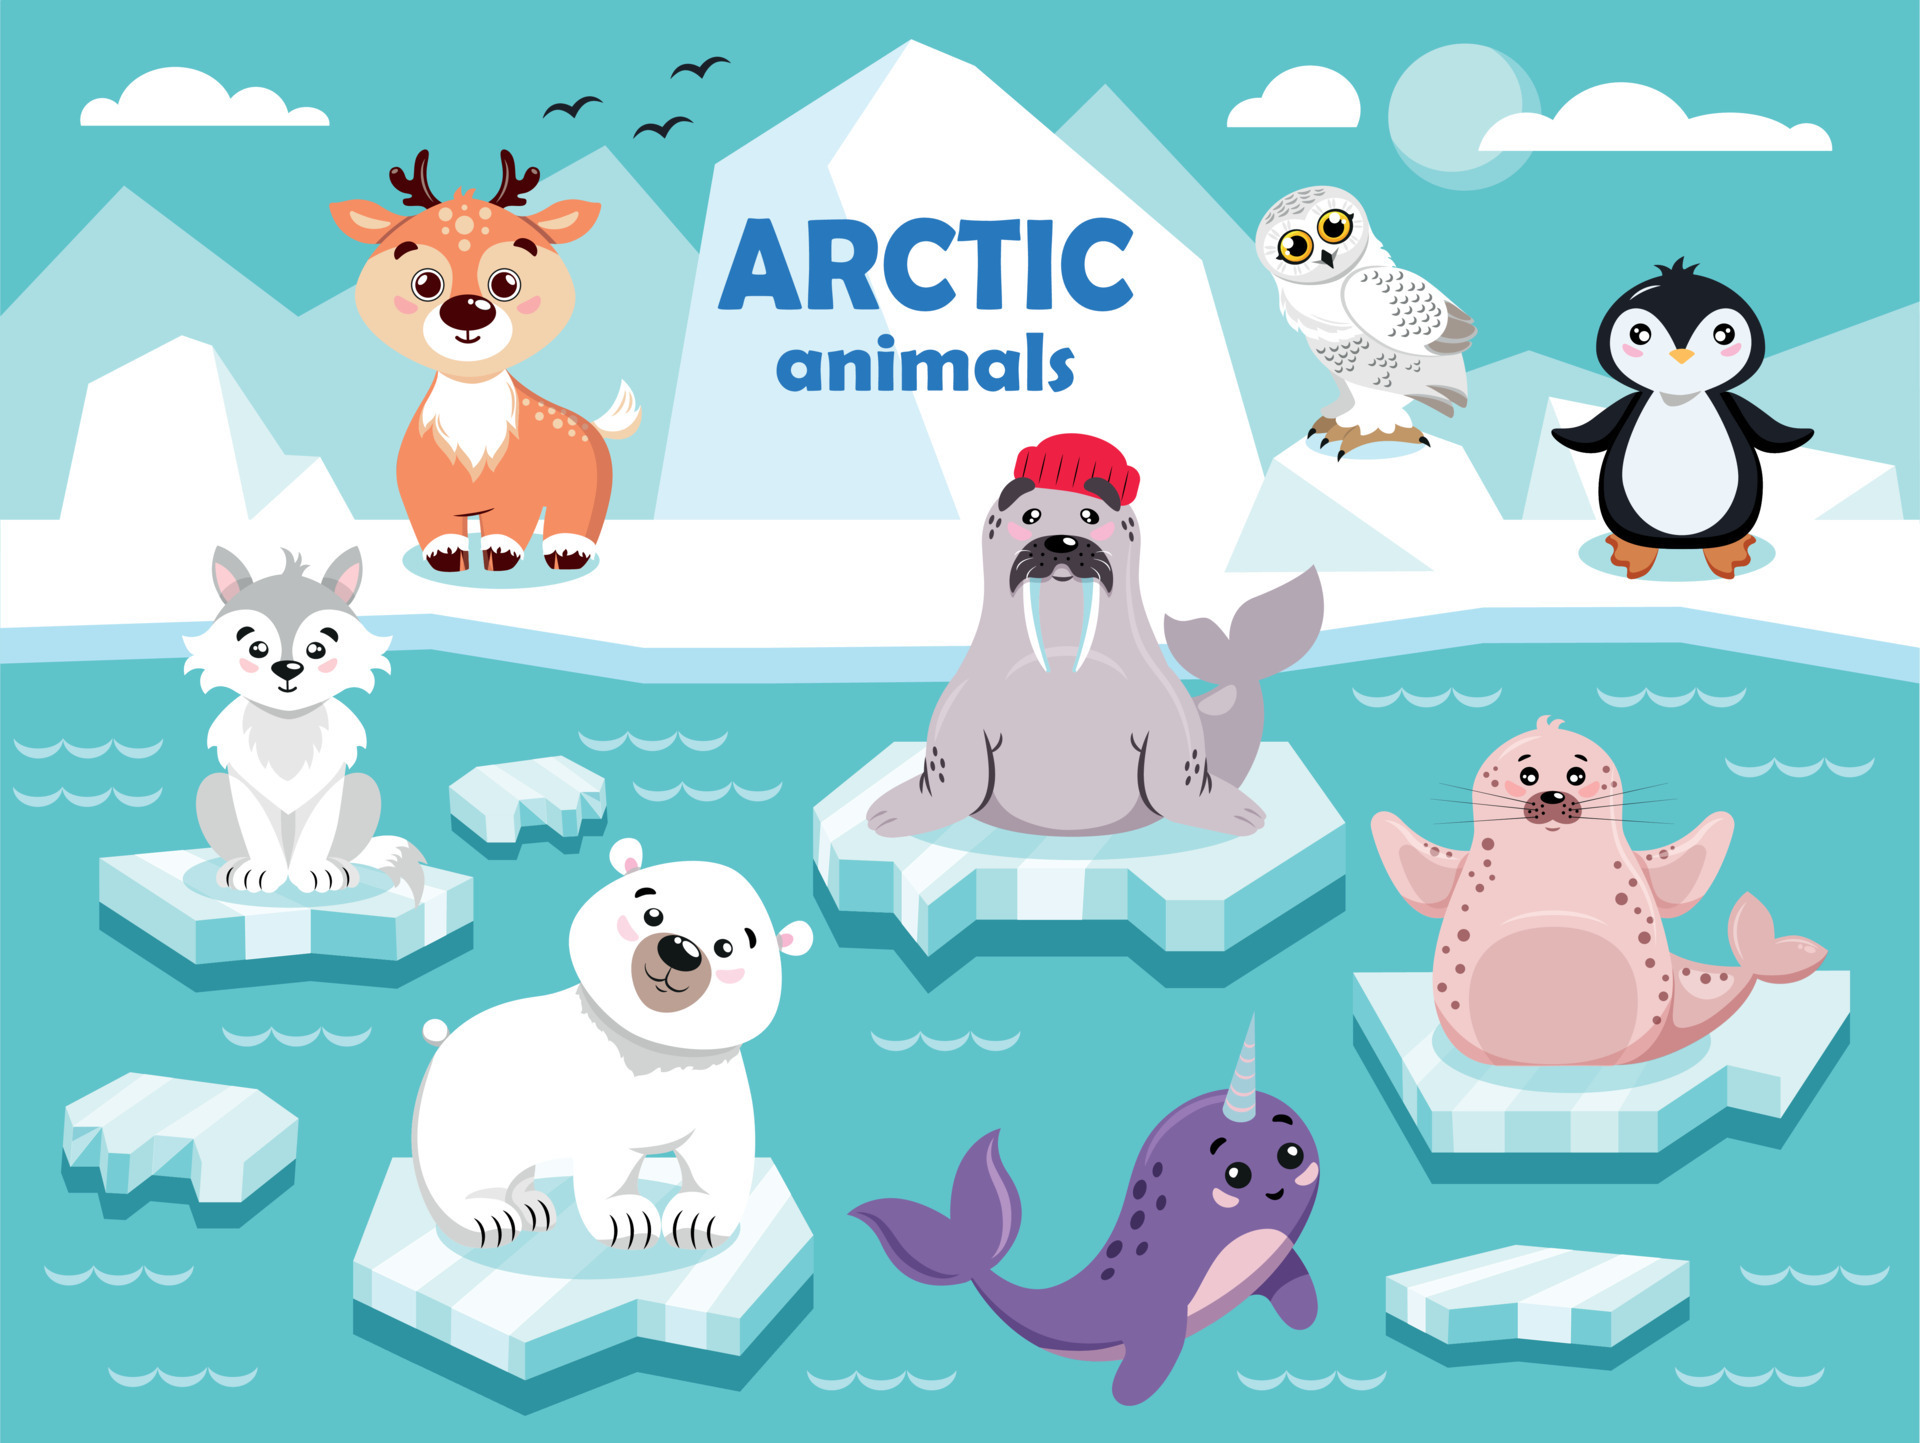 Animals Of The Arctic, Antarctic, South Pole. Collection Of Northern Animals.  Cartoon Style For The Little Ones. Cute Animals Sit On An Ice Floe In The  Ocean. Iceberg, Water, Ocean. 17106262 Vector